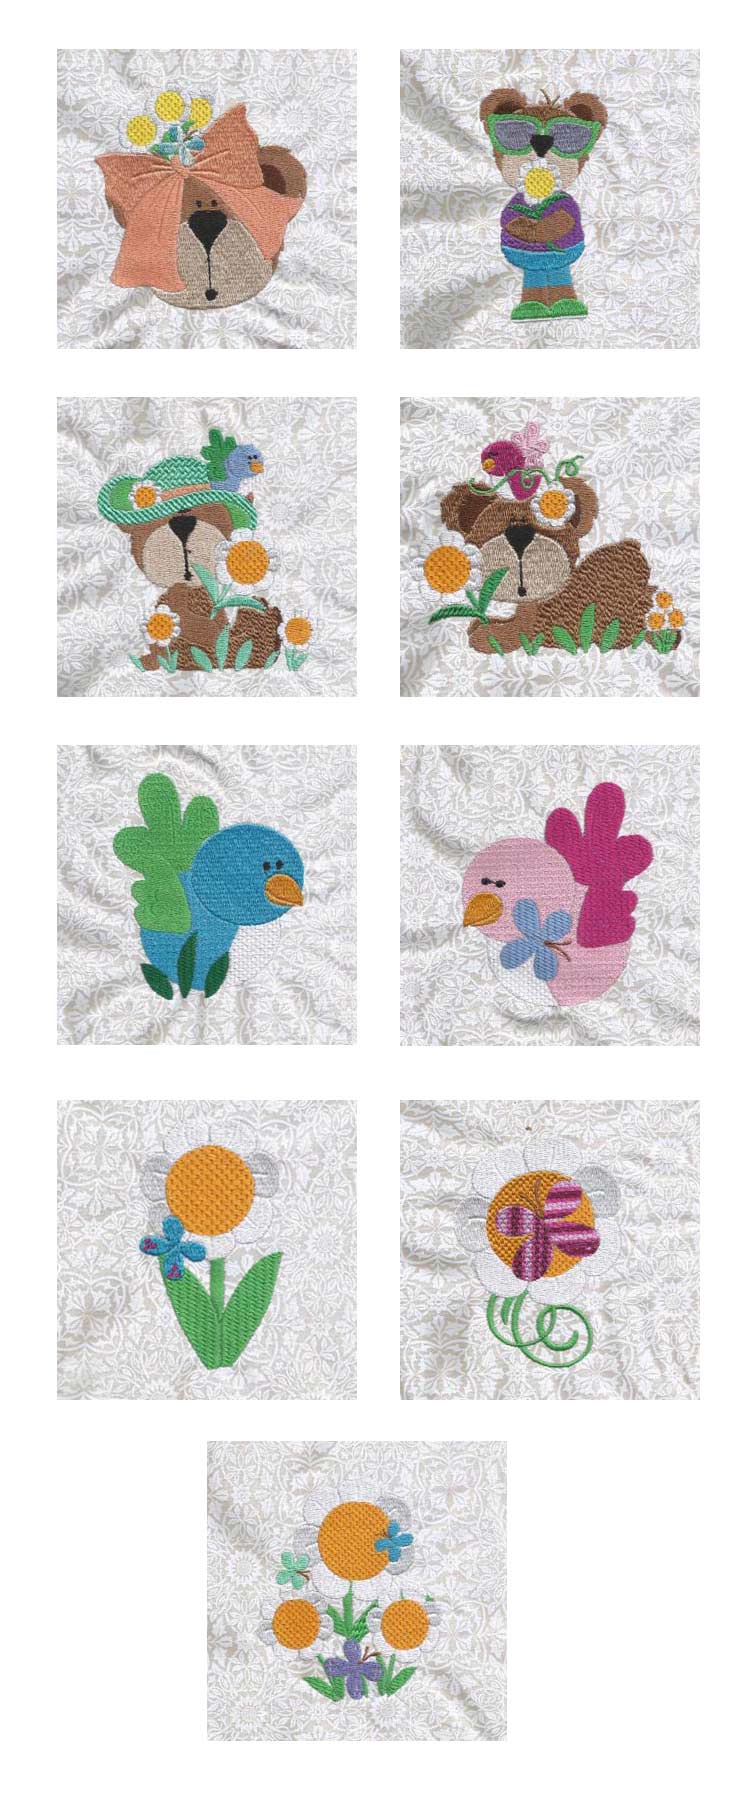 Birds and Bears Embroidery Machine Design Details